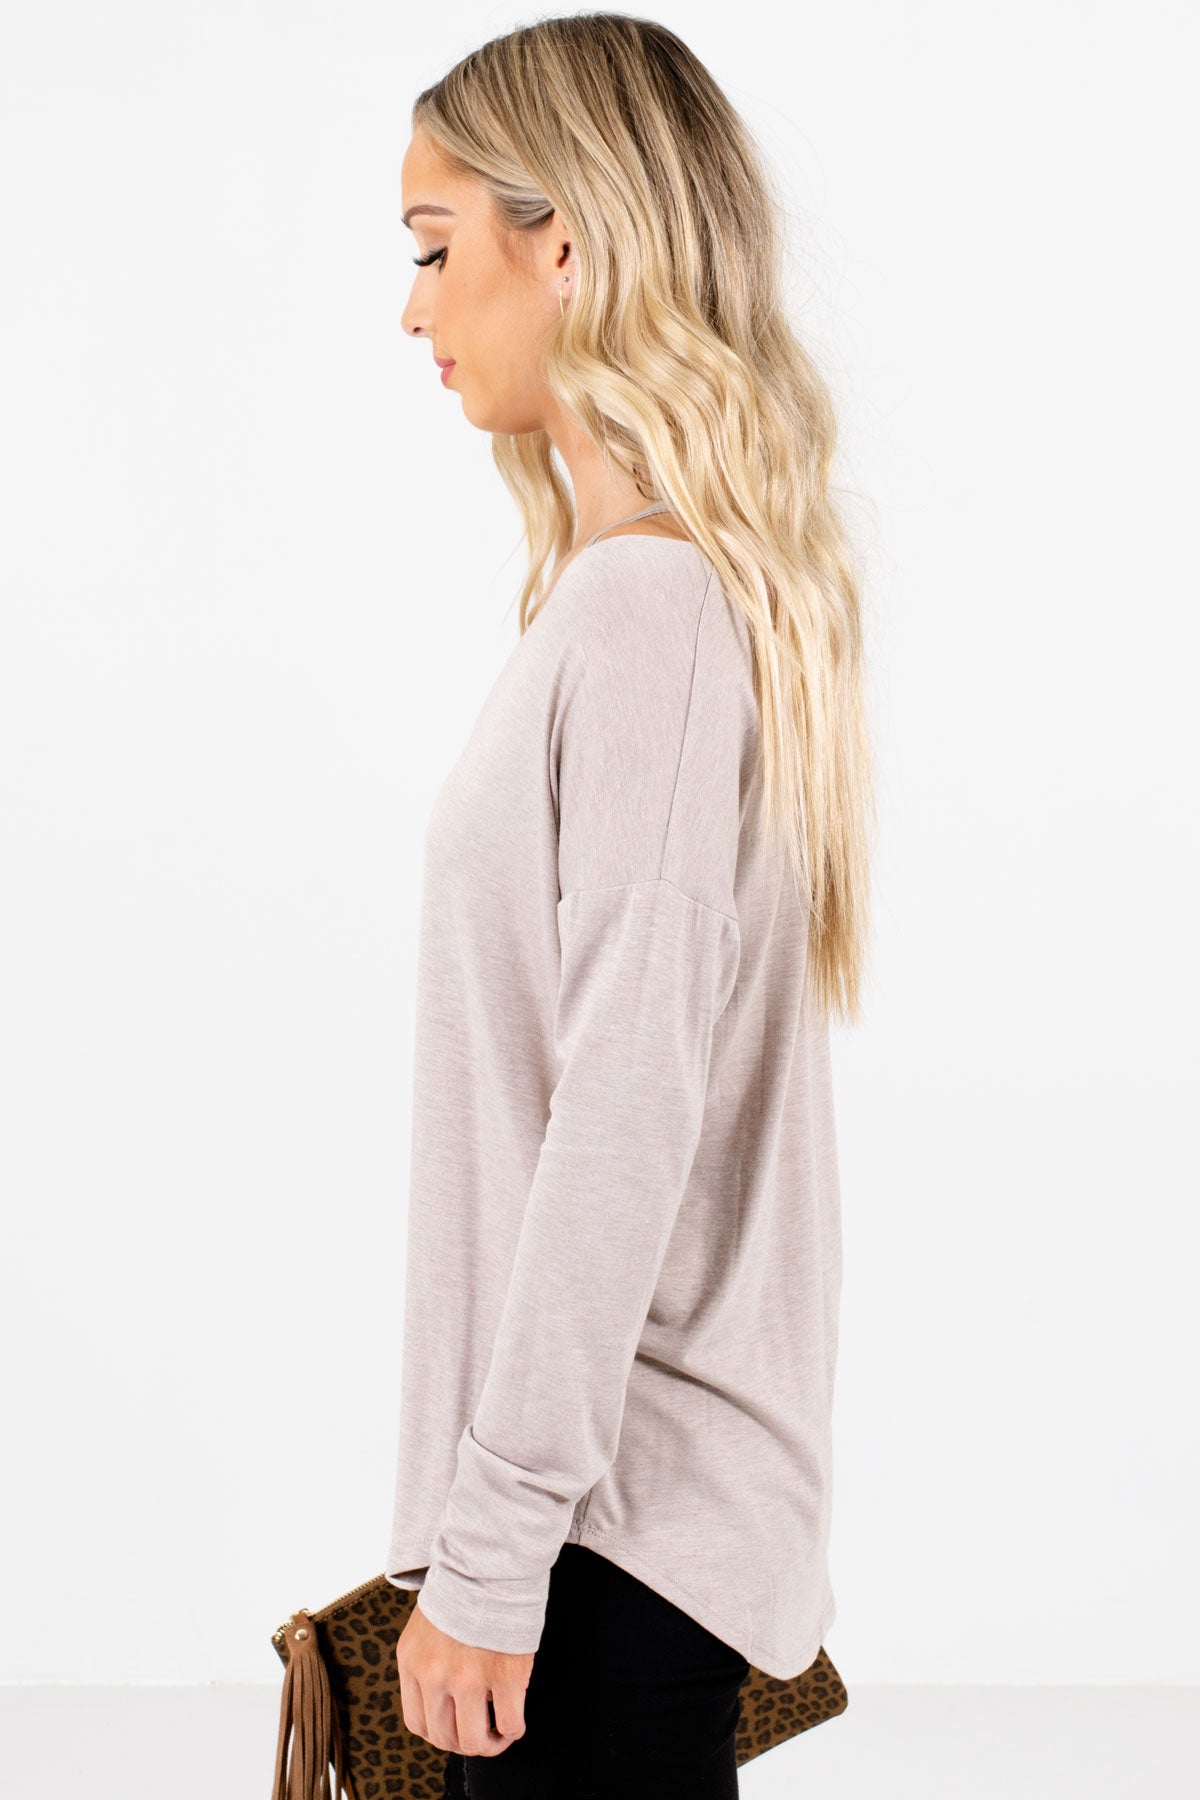 Taupe Brown Long Sleeve Boutique Tops for Women